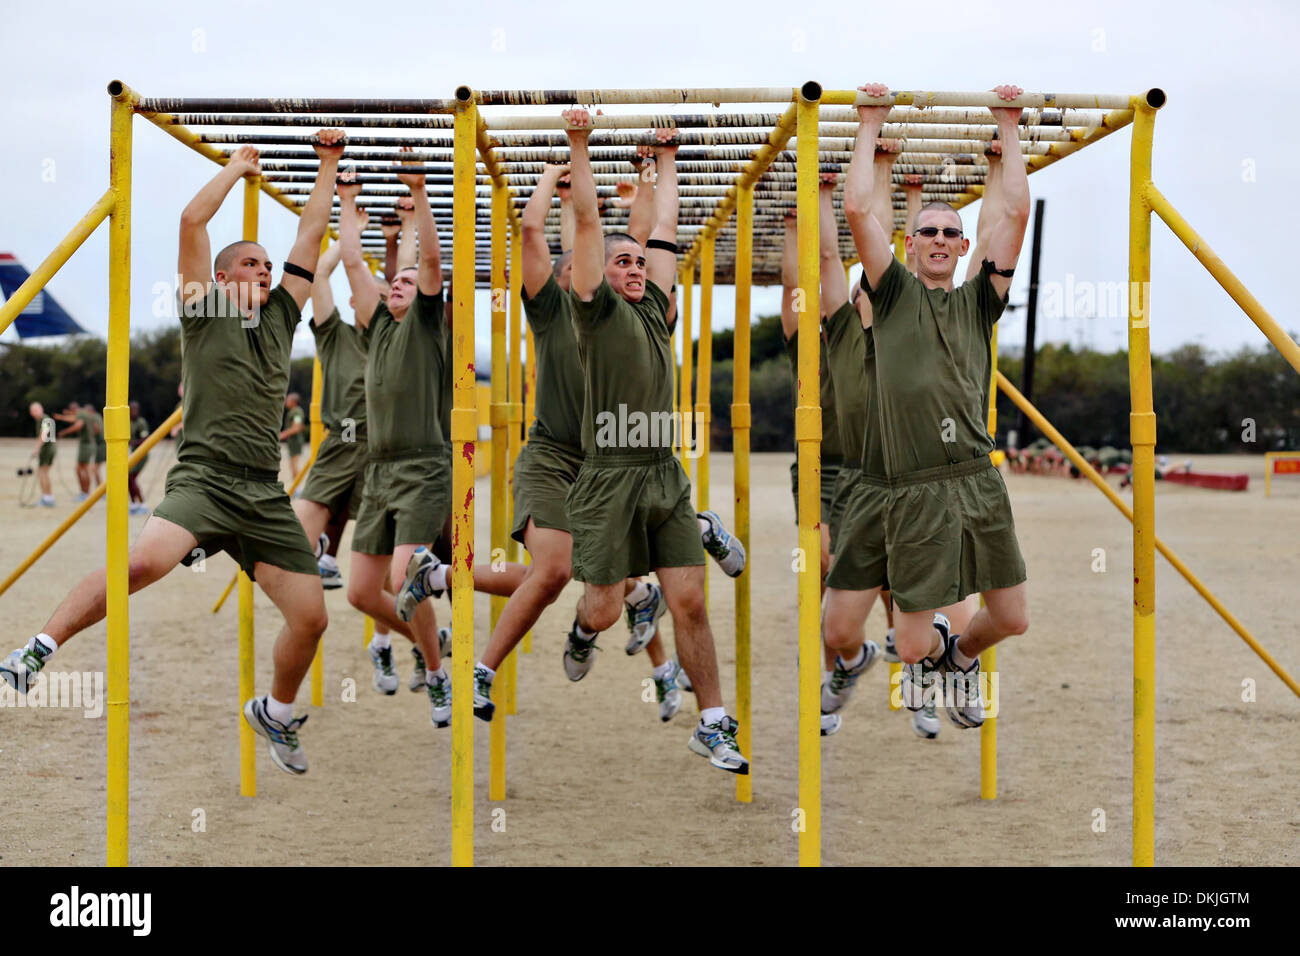 US Marine recruits climb across the monkey bars during the circuit course at boot camp October 24, 2013 in San Diego, CA. Stock Photo